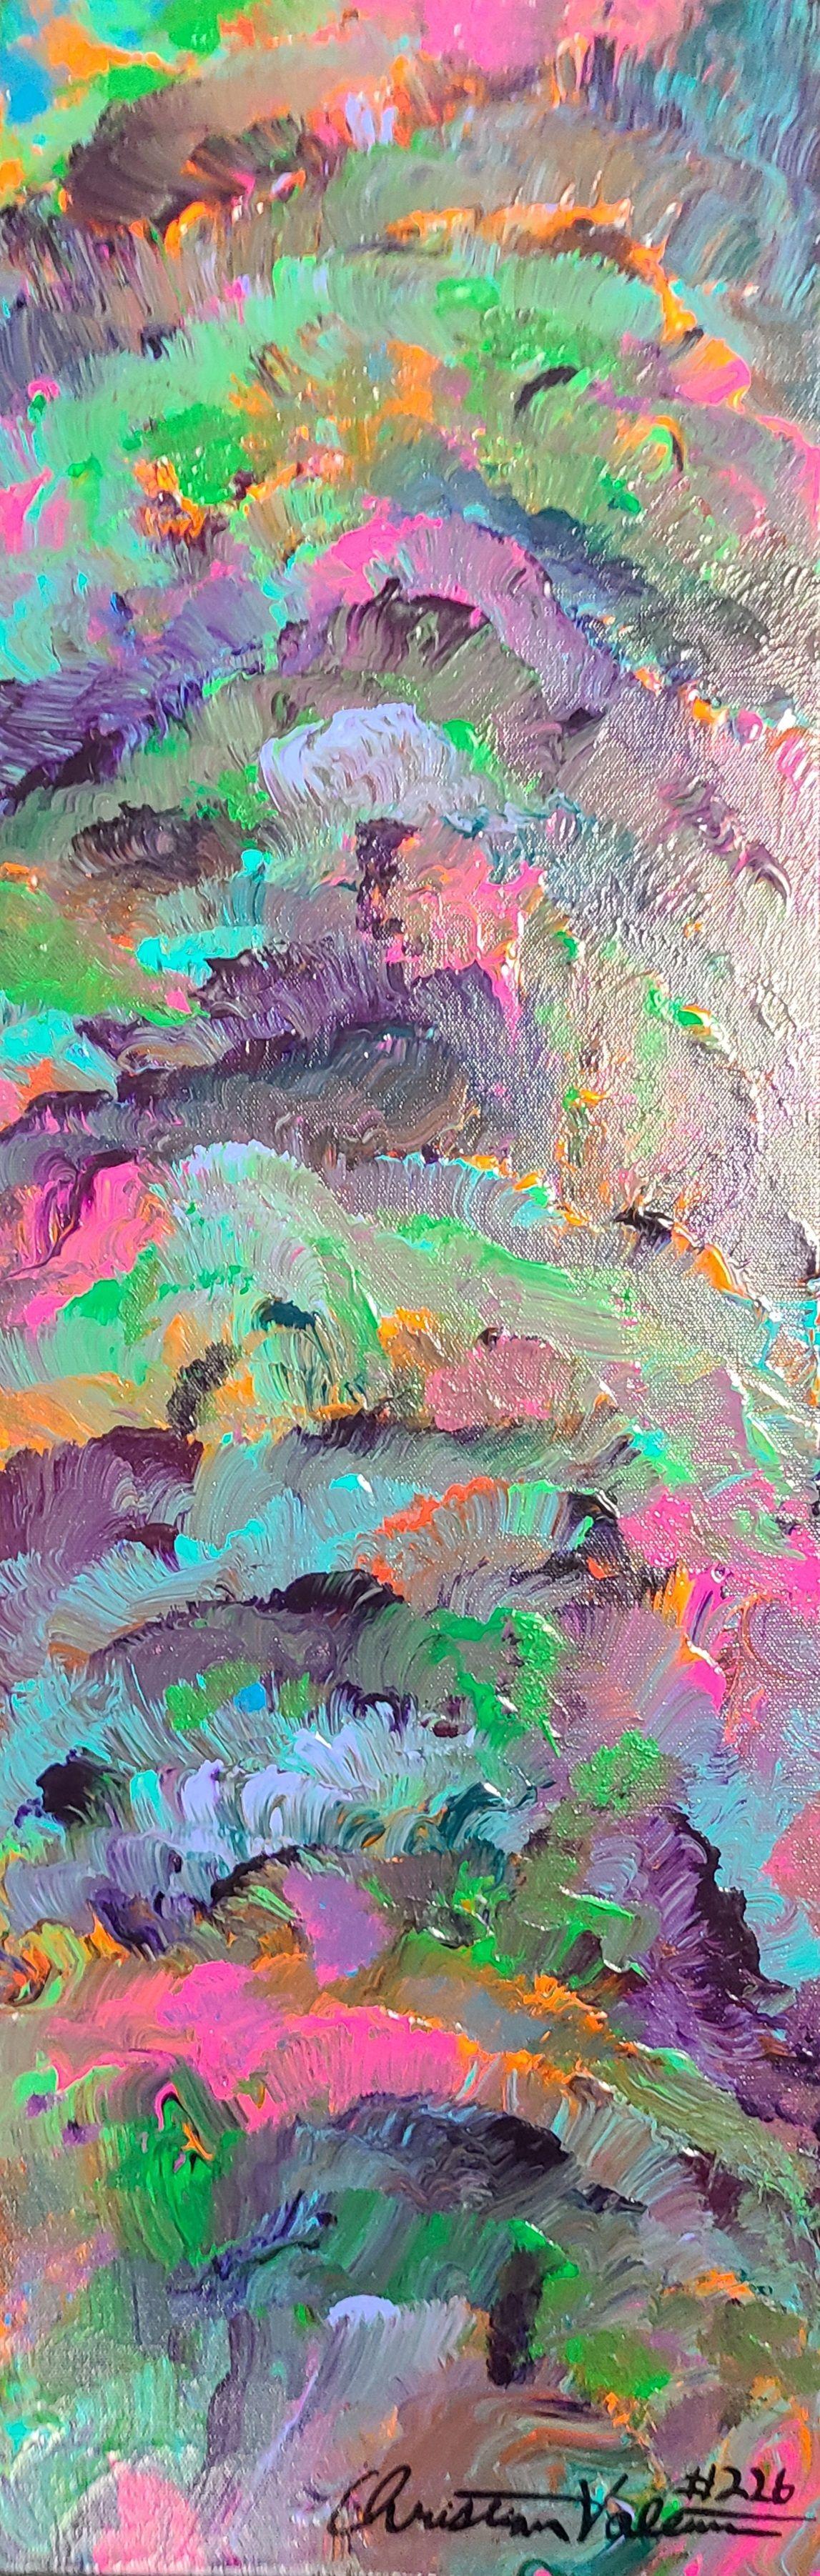 Christian Valentine Abstract Painting - Waves of color, Painting, Acrylic on Canvas